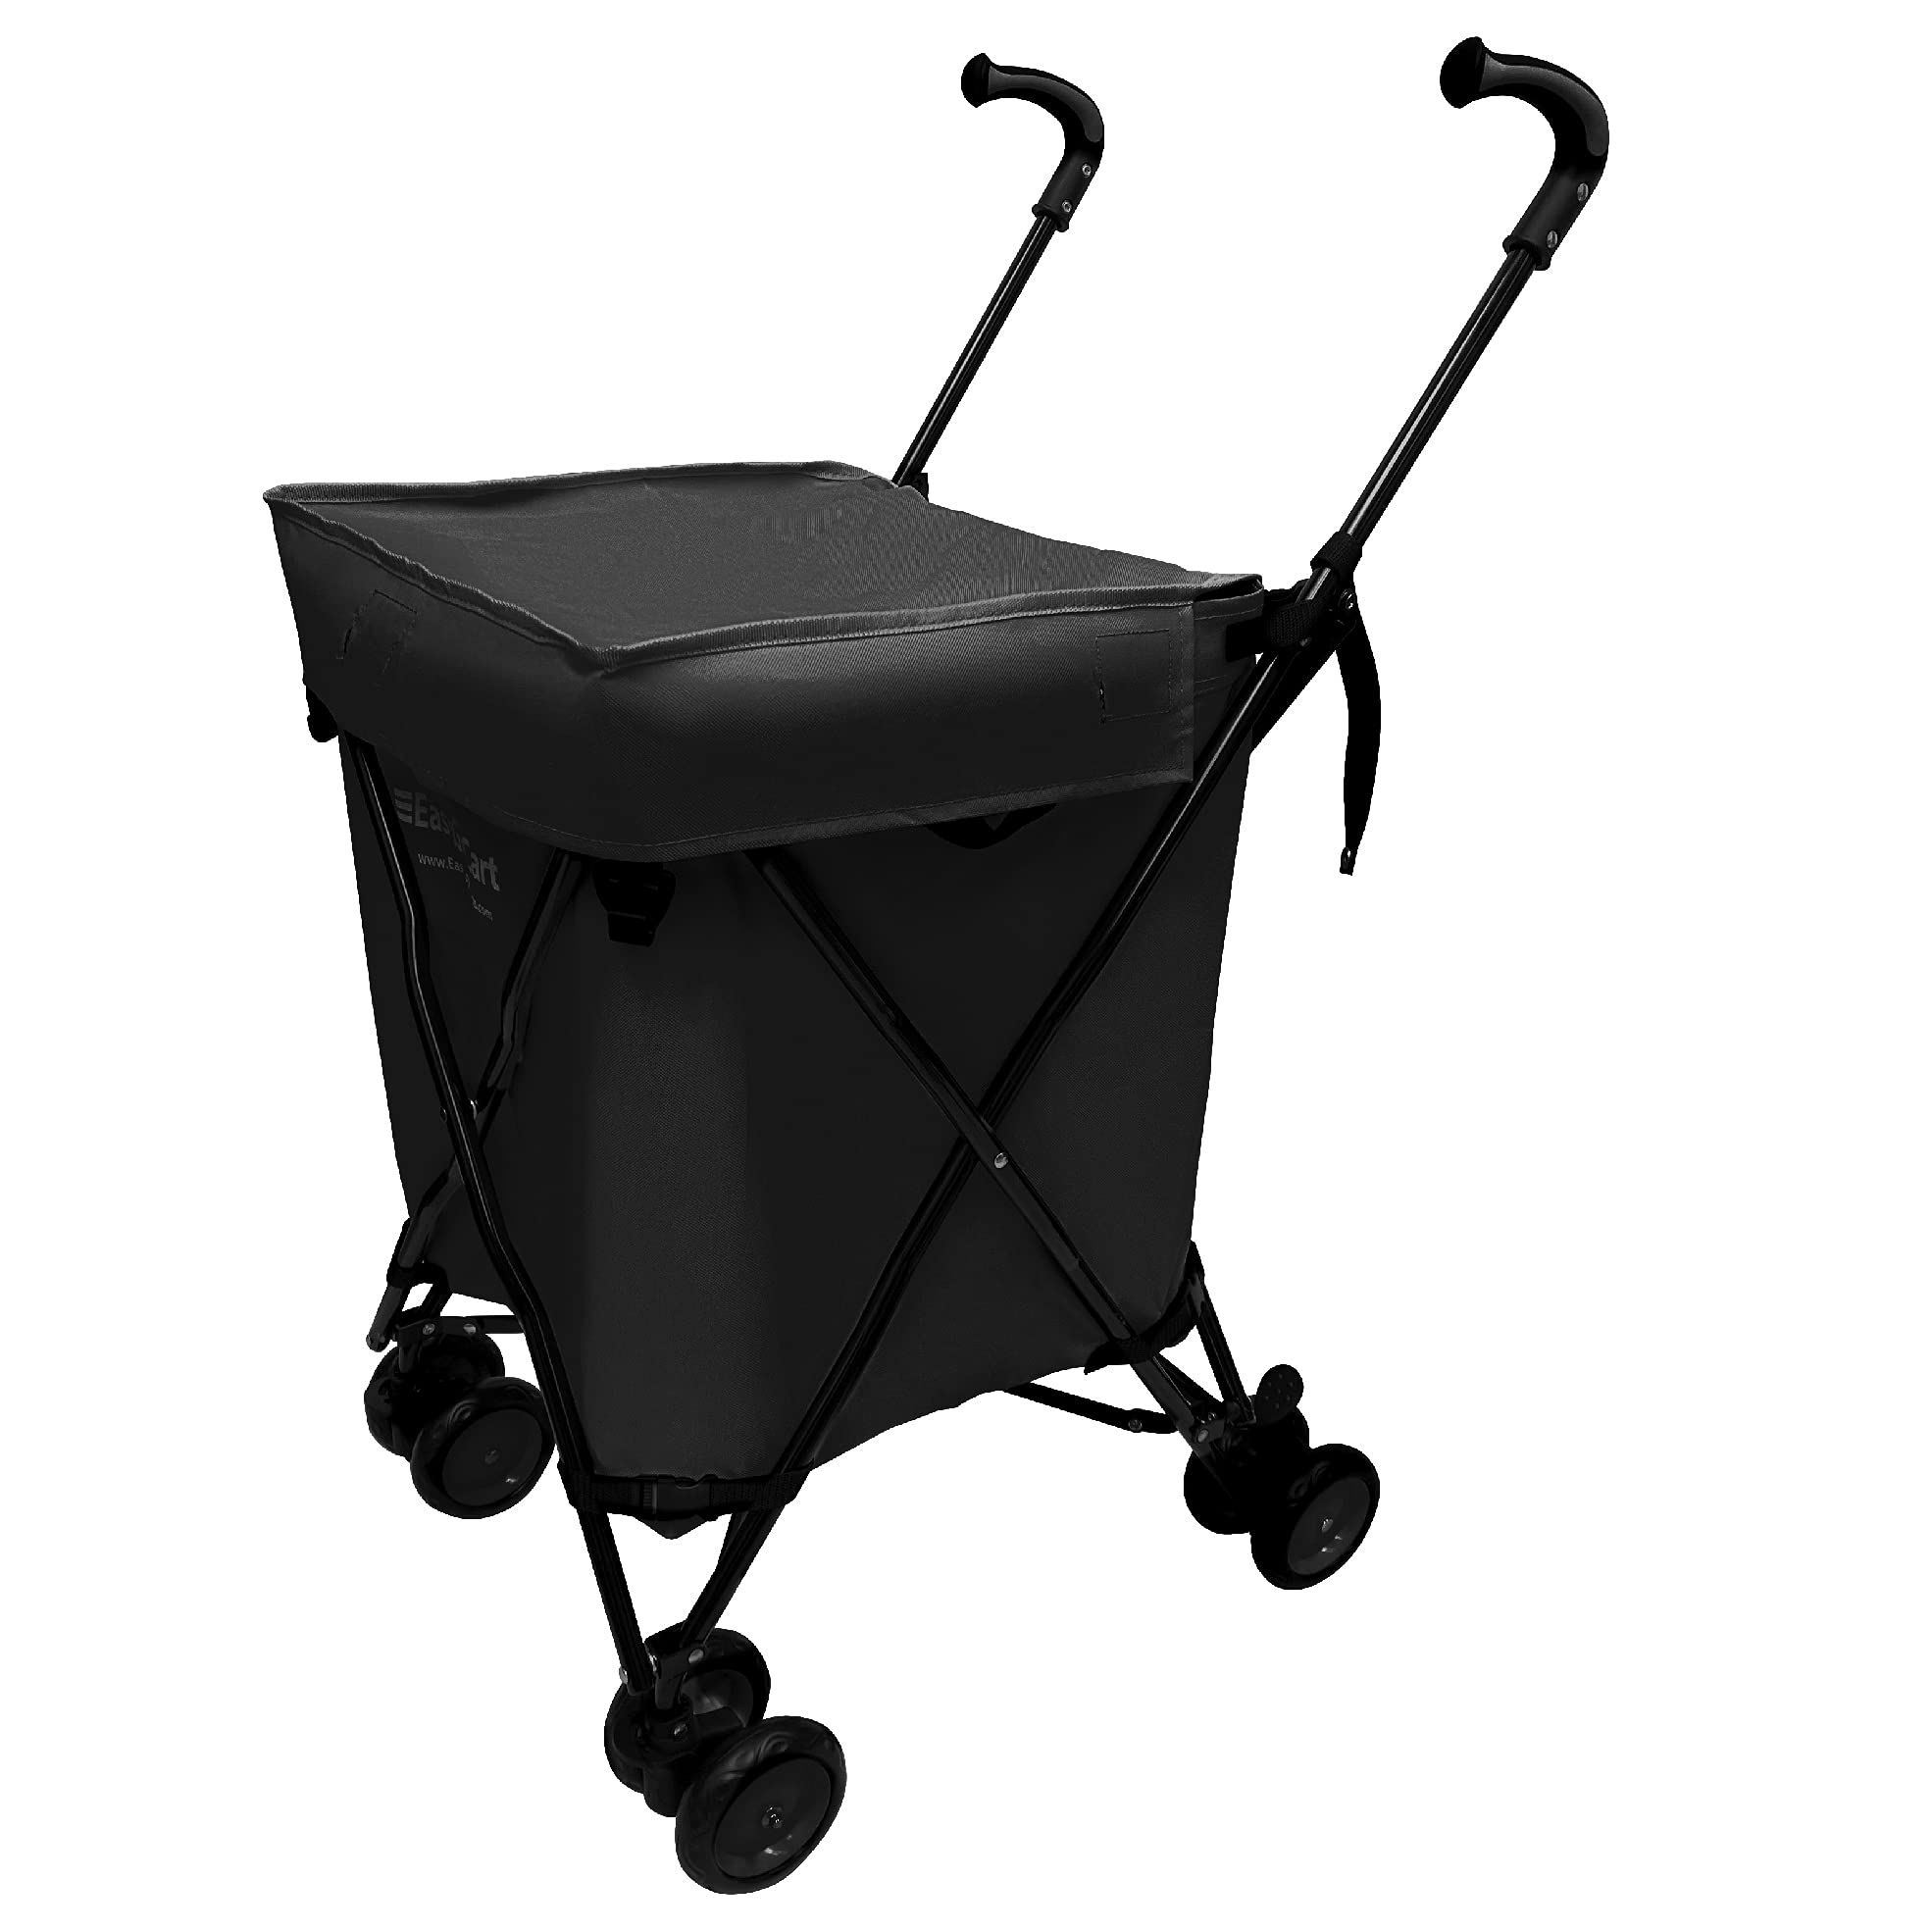 EasyGo Grocery Shopping Cart Laundry Basket Rolling Utility Cart with Wheels – Removable Canvas Bag, Versa Wheels & Rear Brakes - Easy Folding 120lb Capacity – Copyrighted, Black